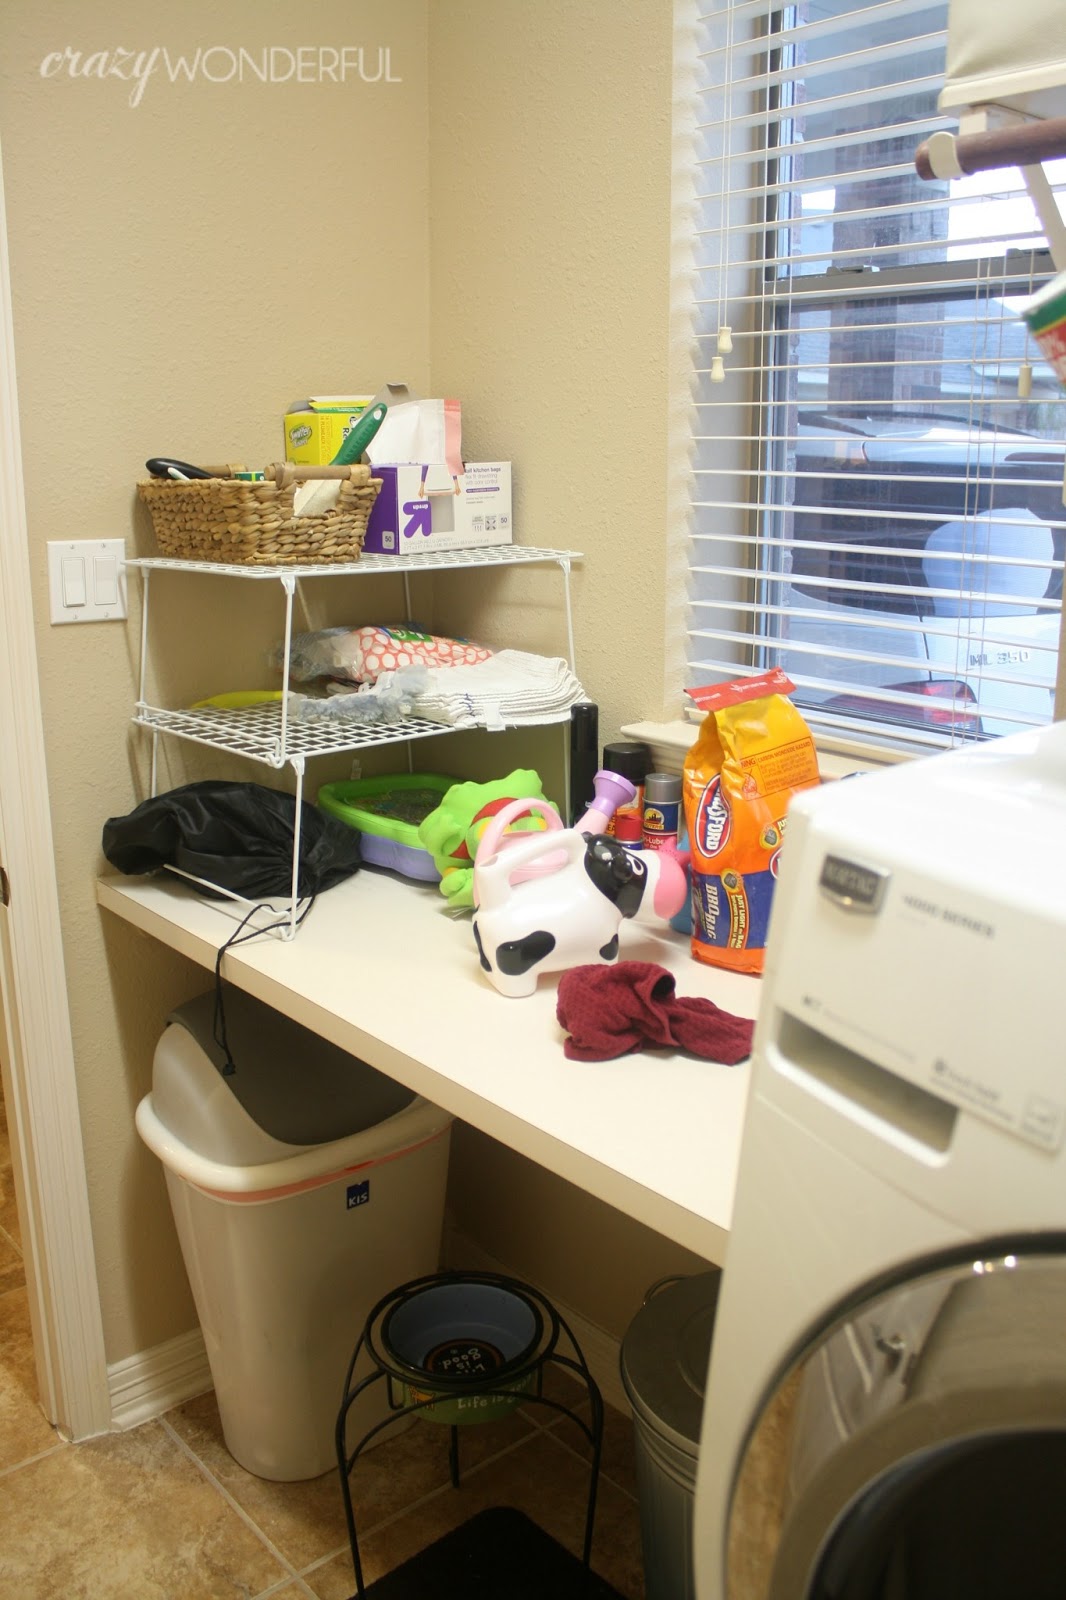 Laundry Room Makeover: My 7 Wildest Laundry Fantasies Come to Life